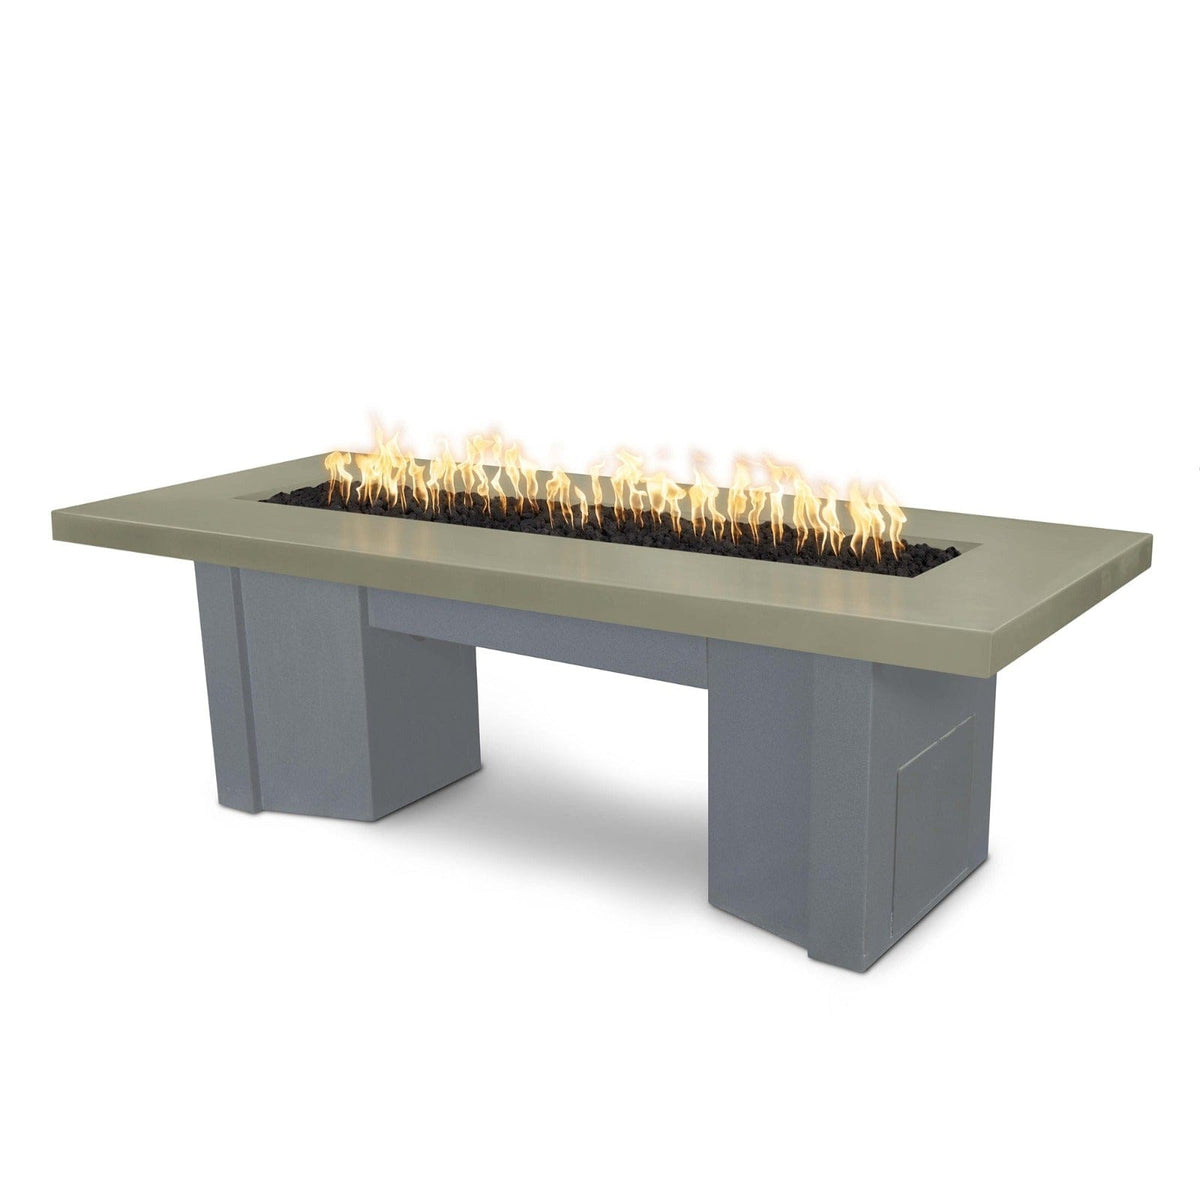 The Outdoor Plus Fire Features Ash (-ASH) / Gray Powder Coated Steel (-GRY) The Outdoor Plus 78&quot; Alameda Fire Table Smooth Concrete in Liquid Propane - Flame Sense System with Push Button Spark Igniter / OPT-ALMGFRC78FSEN-LP